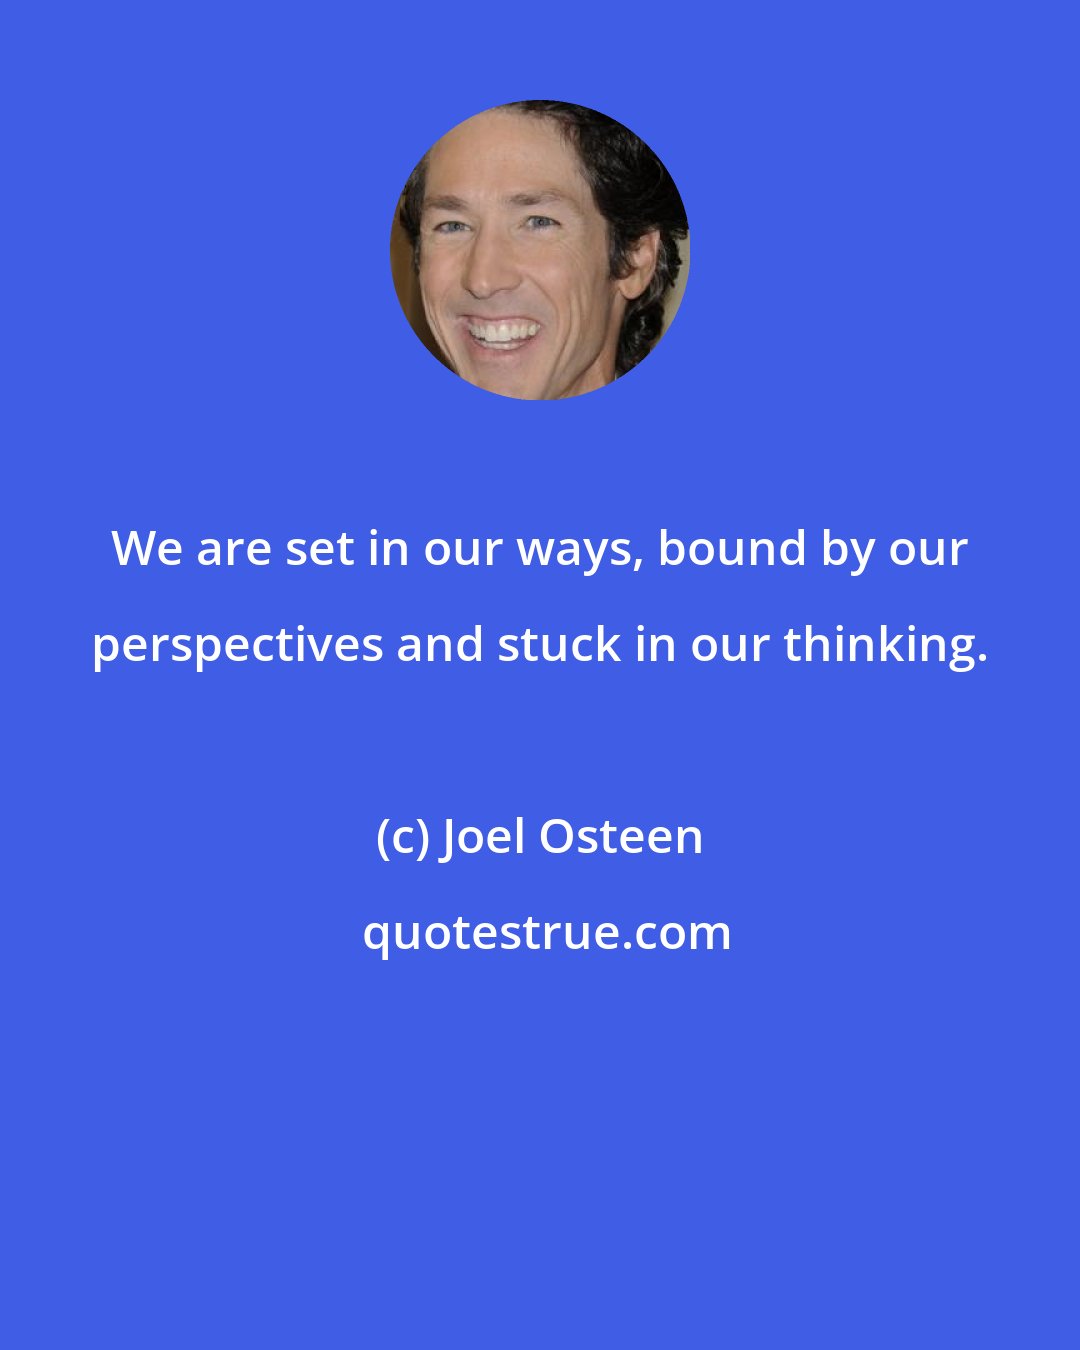 Joel Osteen: We are set in our ways, bound by our perspectives and stuck in our thinking.